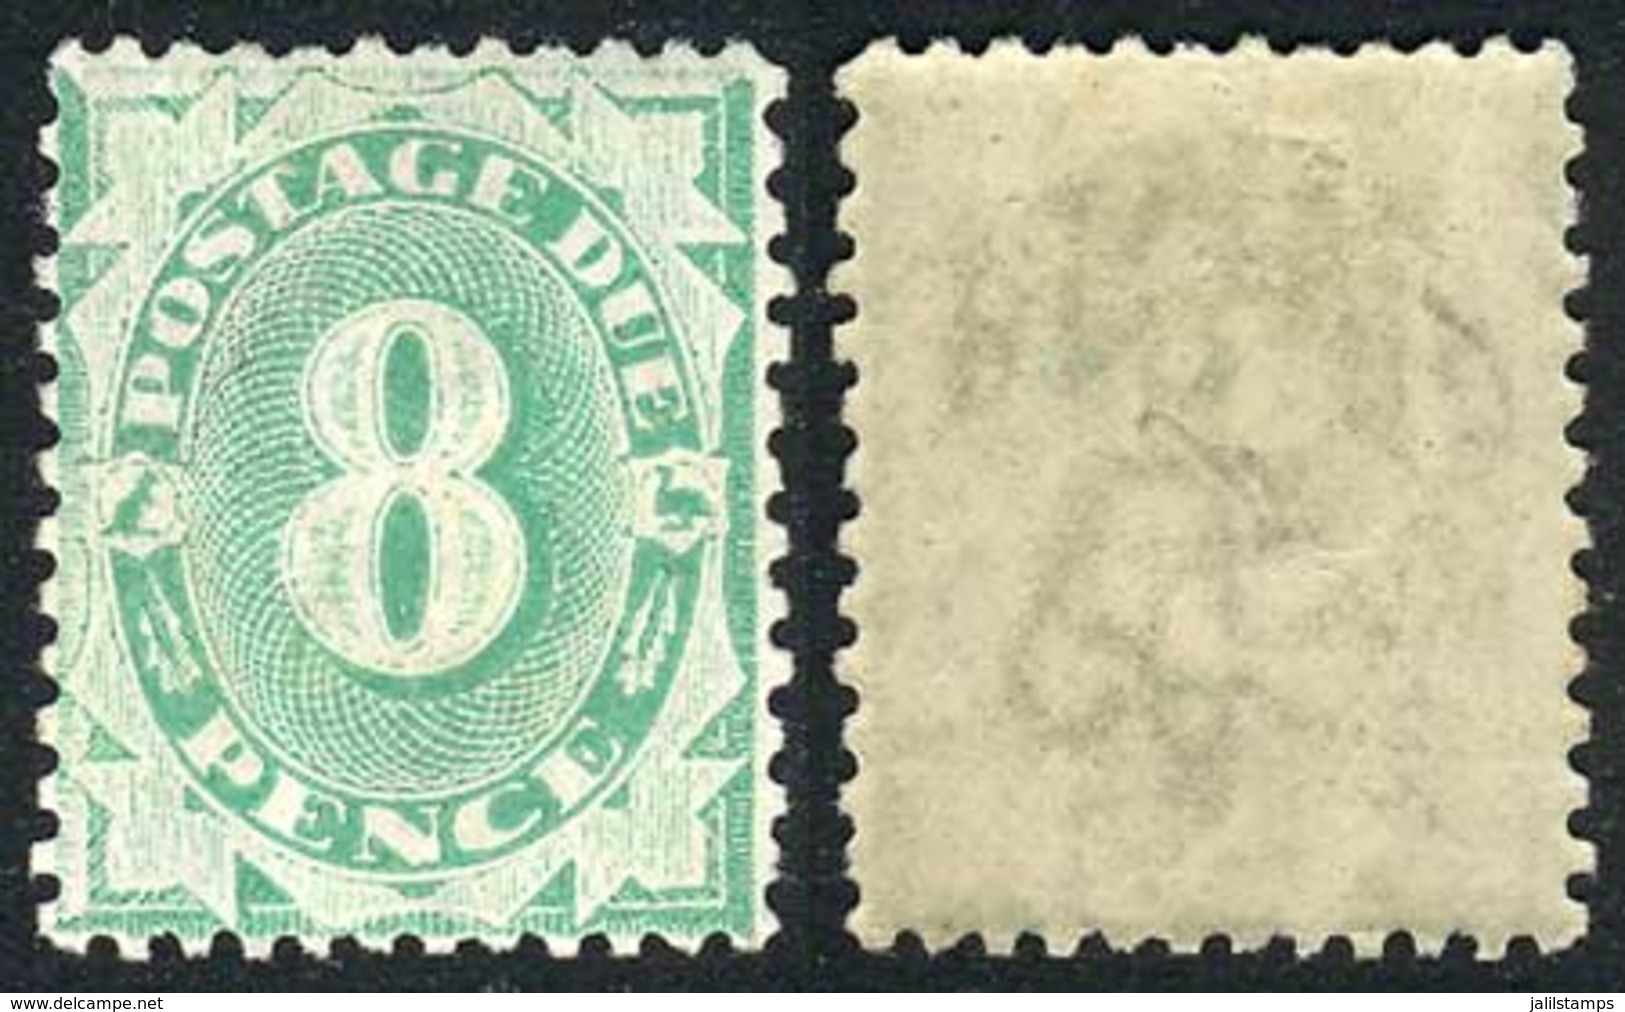 AUSTRALIA: Yvert 16 (Scott J16), 1902/4 8p. Emerald With Crown Over NSW Watermark, Perforation 12x11, INVERTED WATERMARK - Revenue Stamps